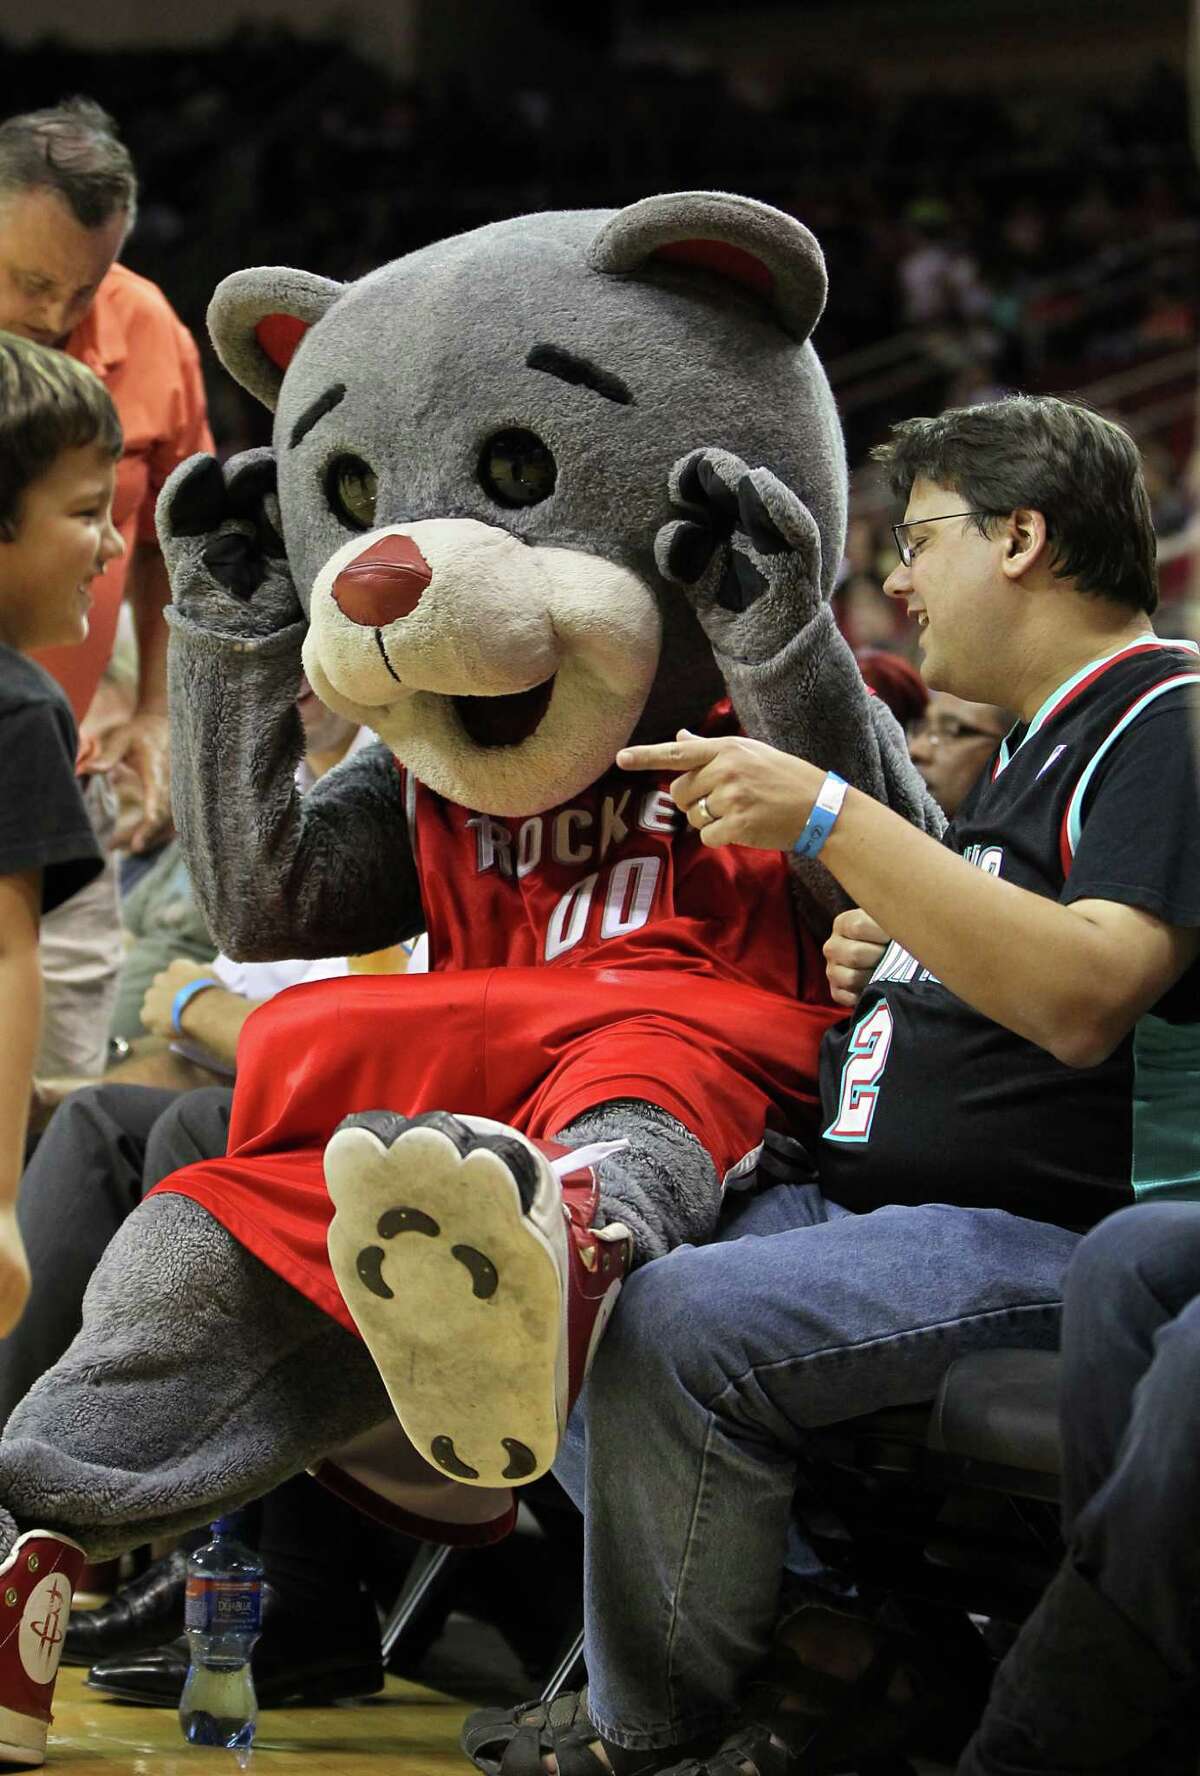 Clutch the Bear jokes around with fans at a Rockets game.